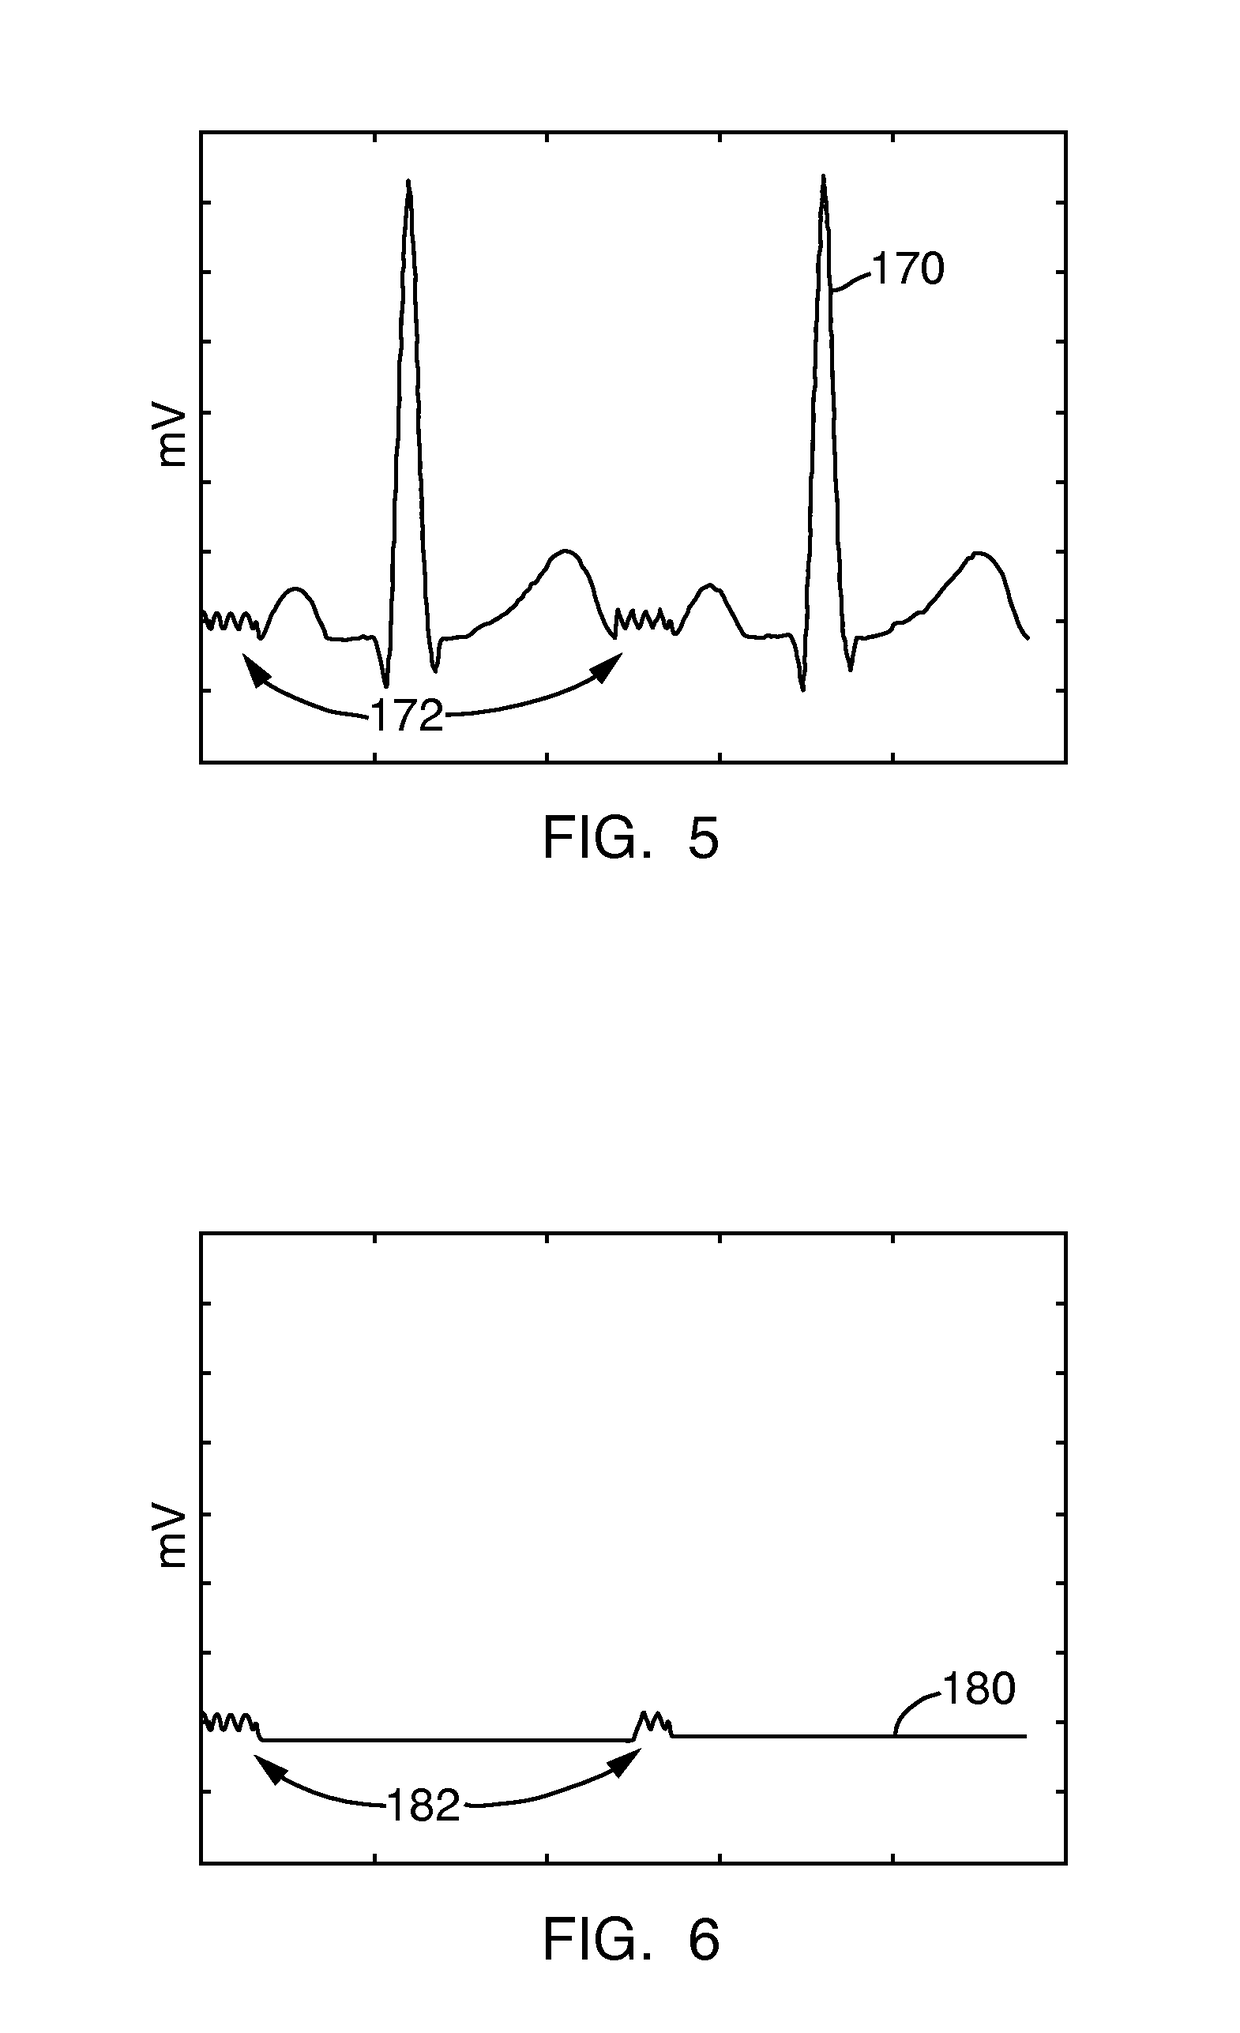 Method and system for analyzing noise in an electrophysiology study